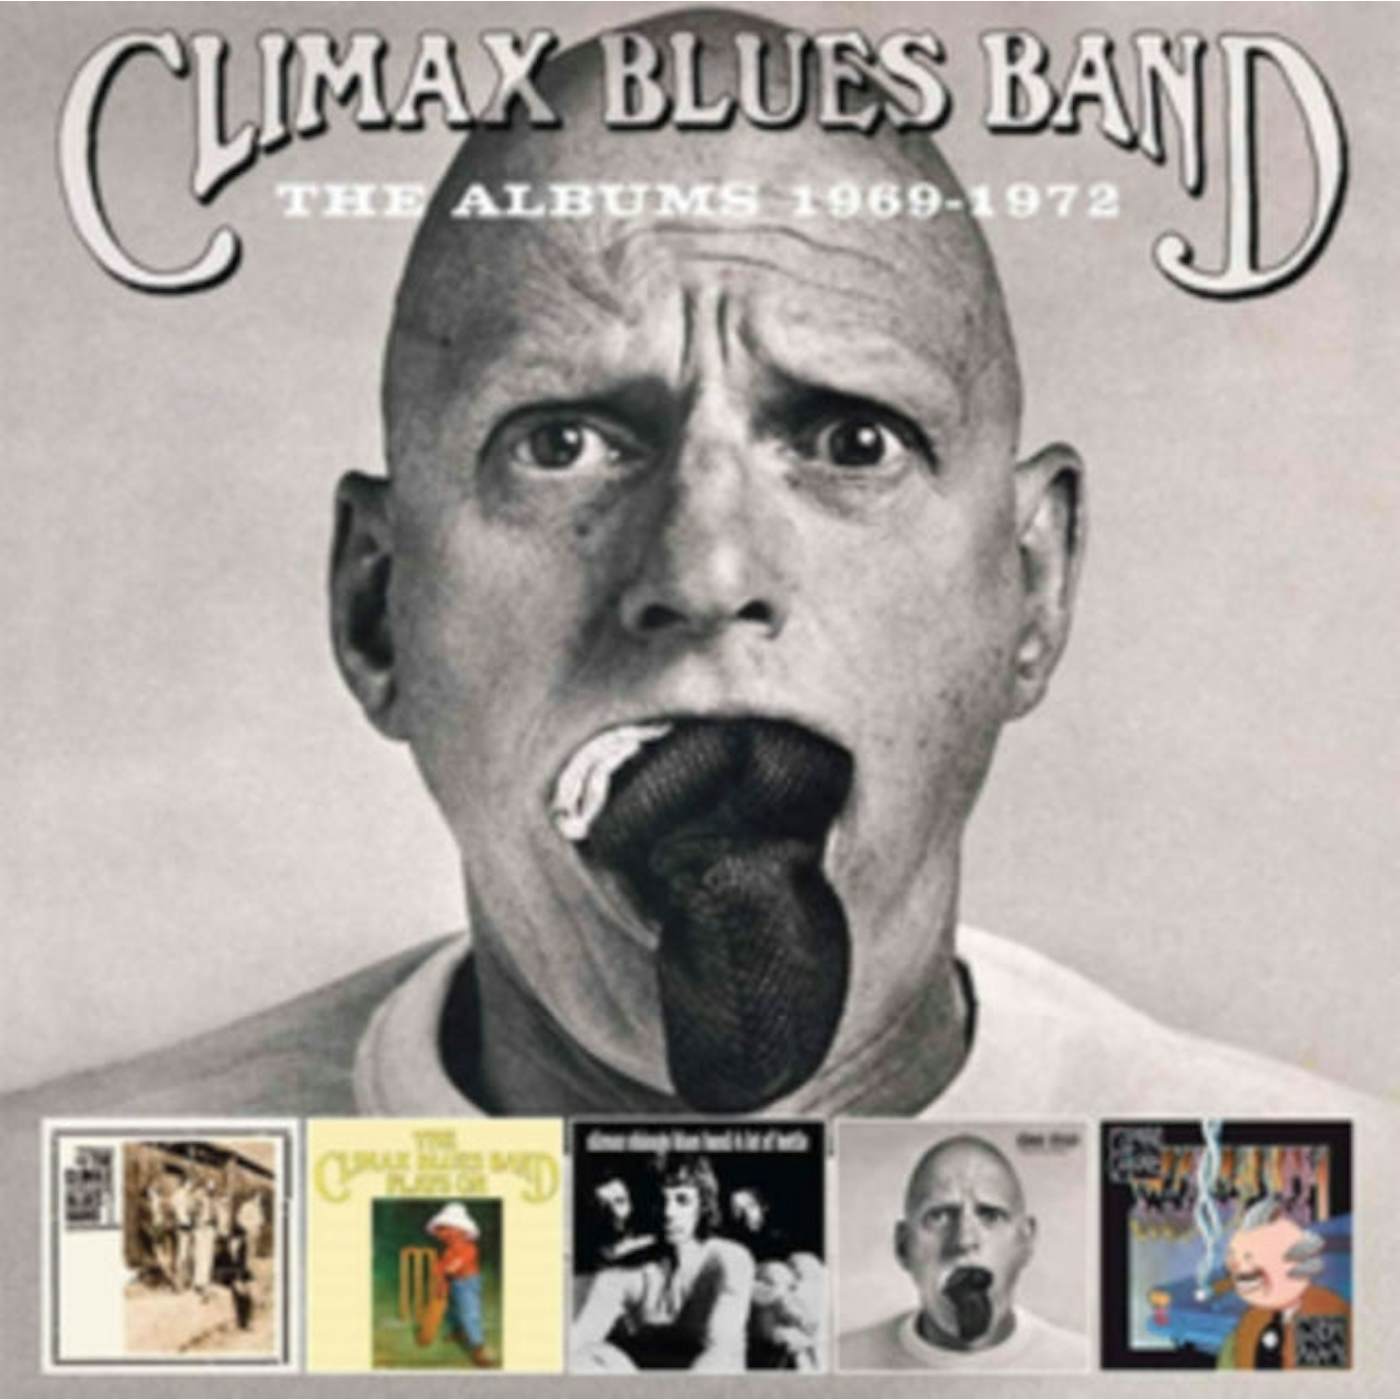 Climax Blues Band CD - The Albums 19 69-19 72 (Remastered Edition)